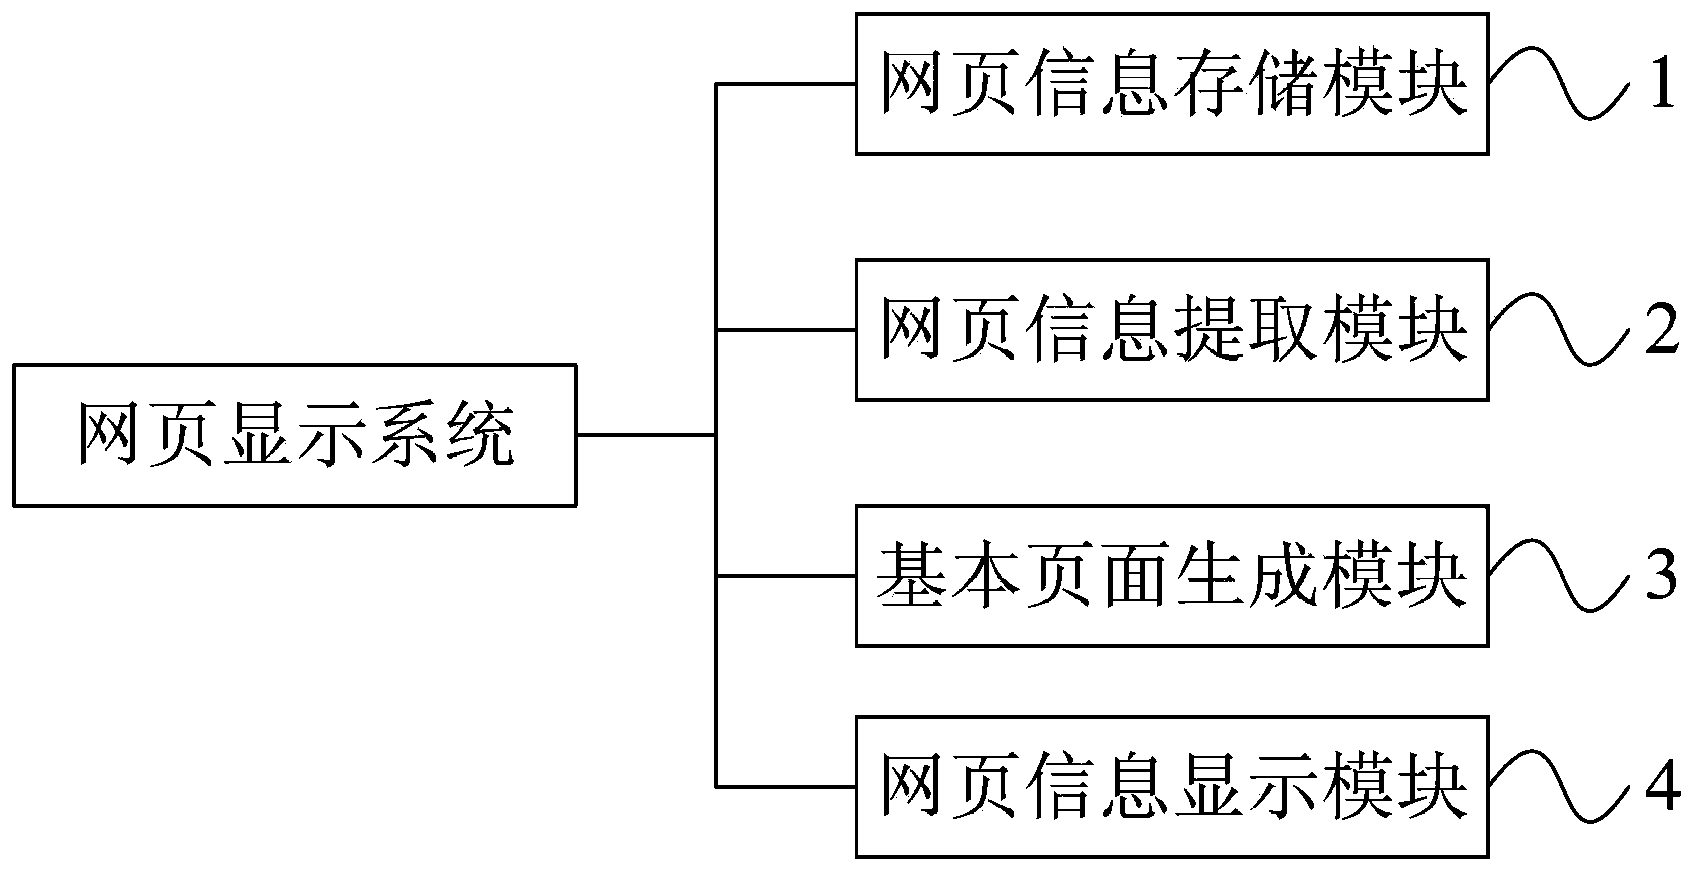 Webpage display system and method